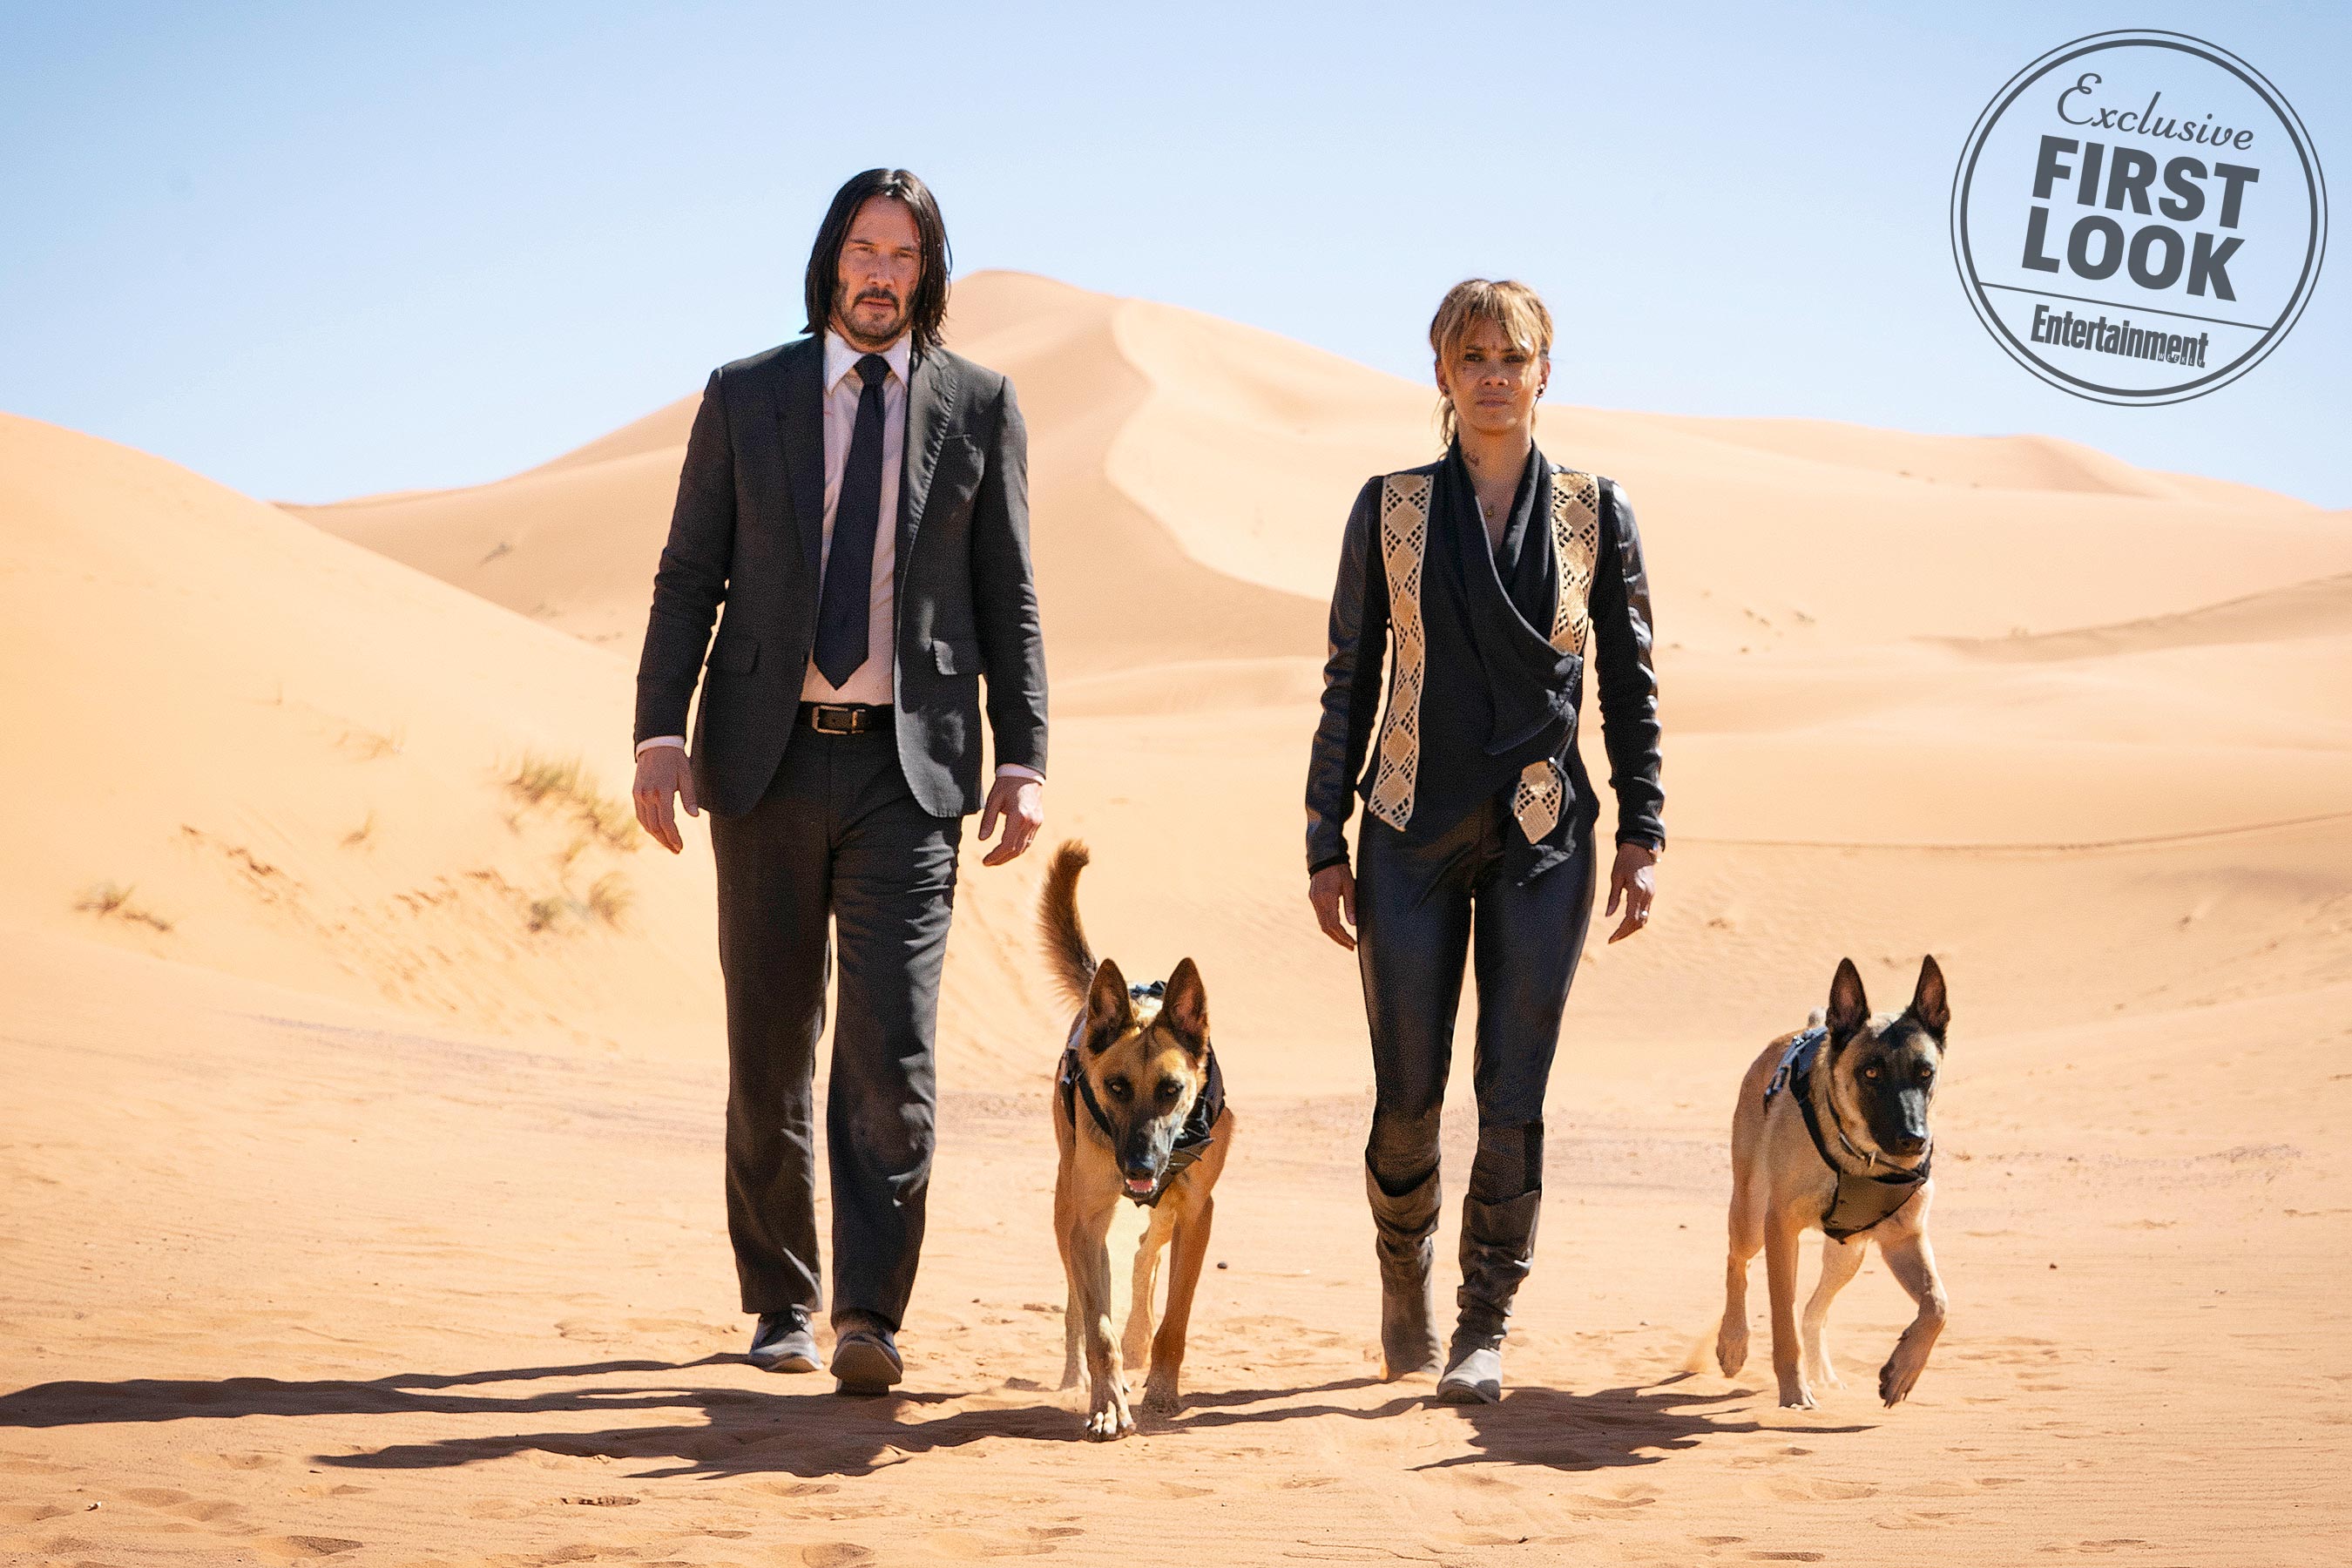 John Wick gets adopted into a new symbolic family.